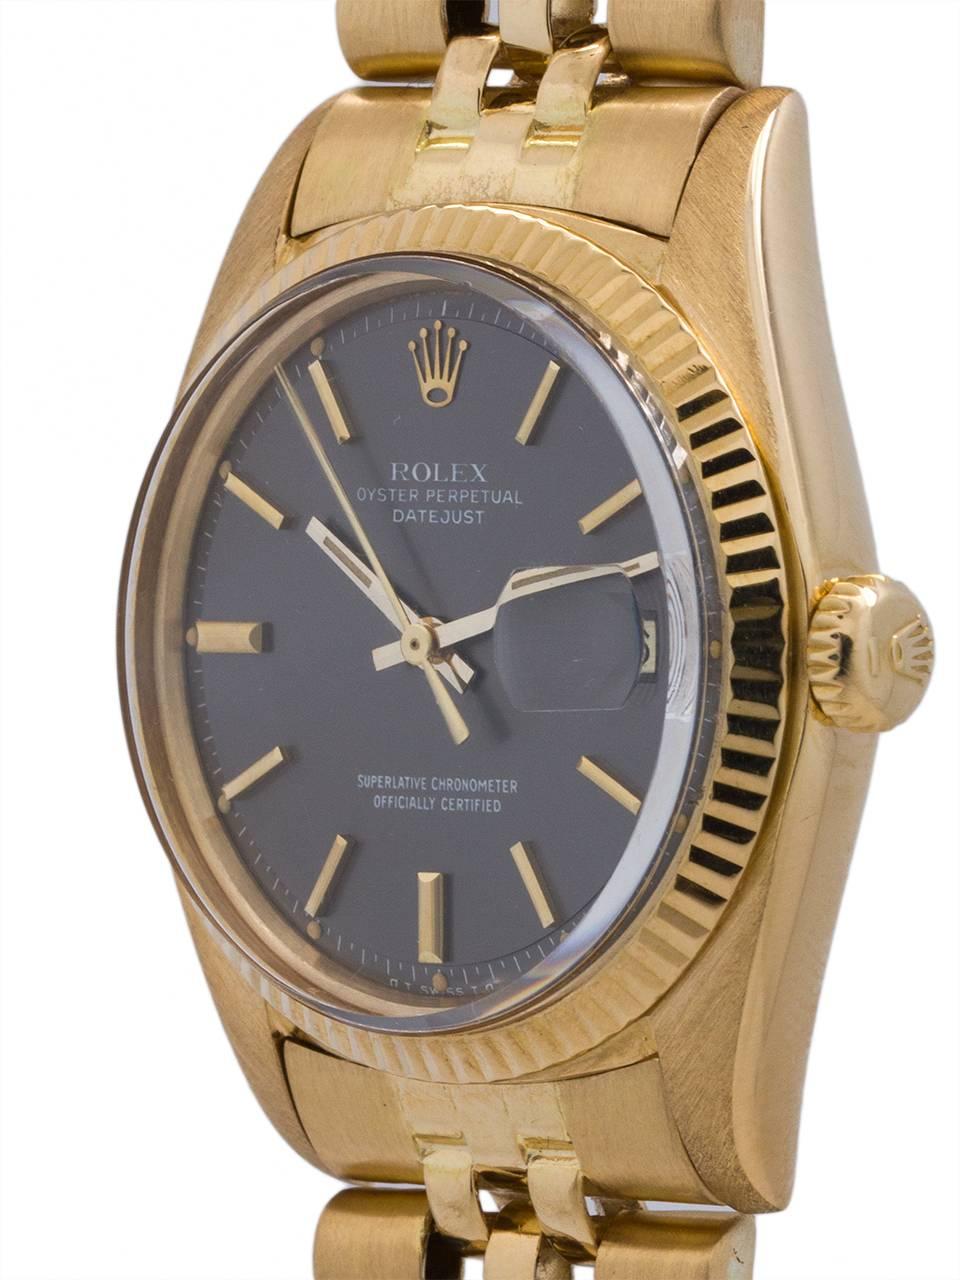 
Rolex 18K Yellow Gold Datejust ref 1601 circa 1974. 36mm diameter full size man’s model with fluted bezel and acrylic crystal. Featuring a scarce and striking original dark grey pie pan dial with applied yellow gold indexes and baton hands. Powered